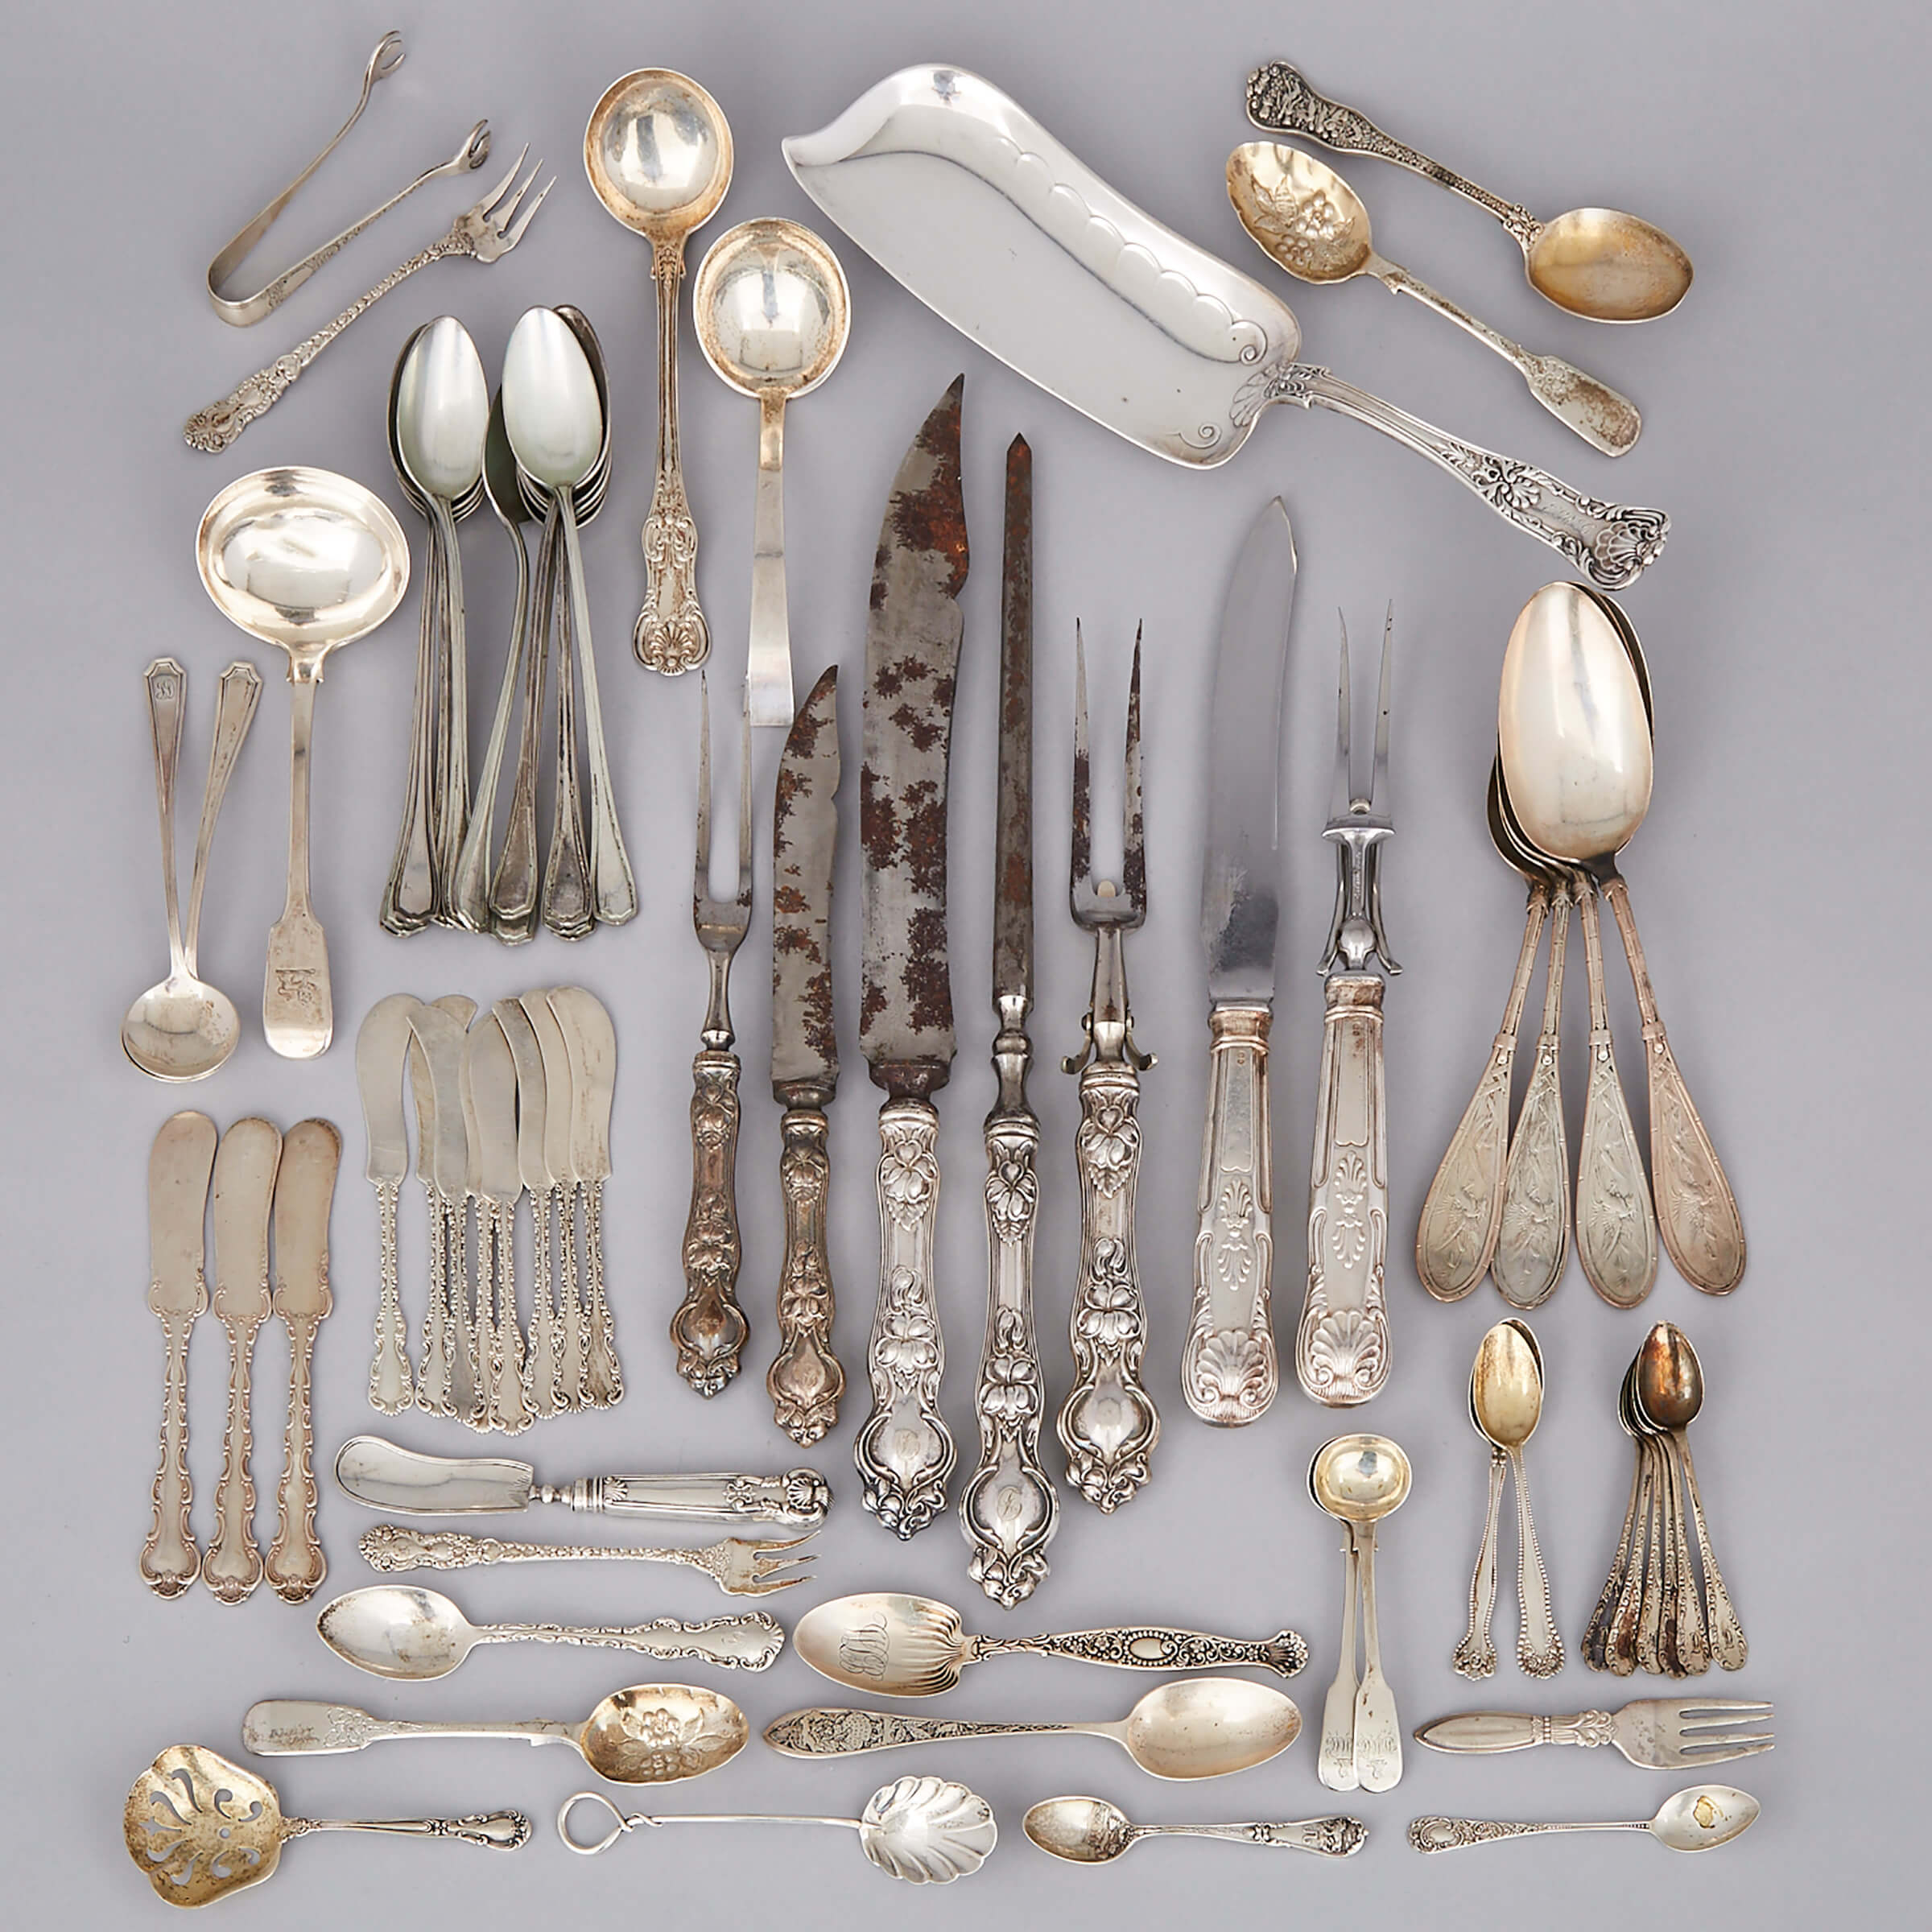 Group of North American and English Silver Flatware, 19th/20th century